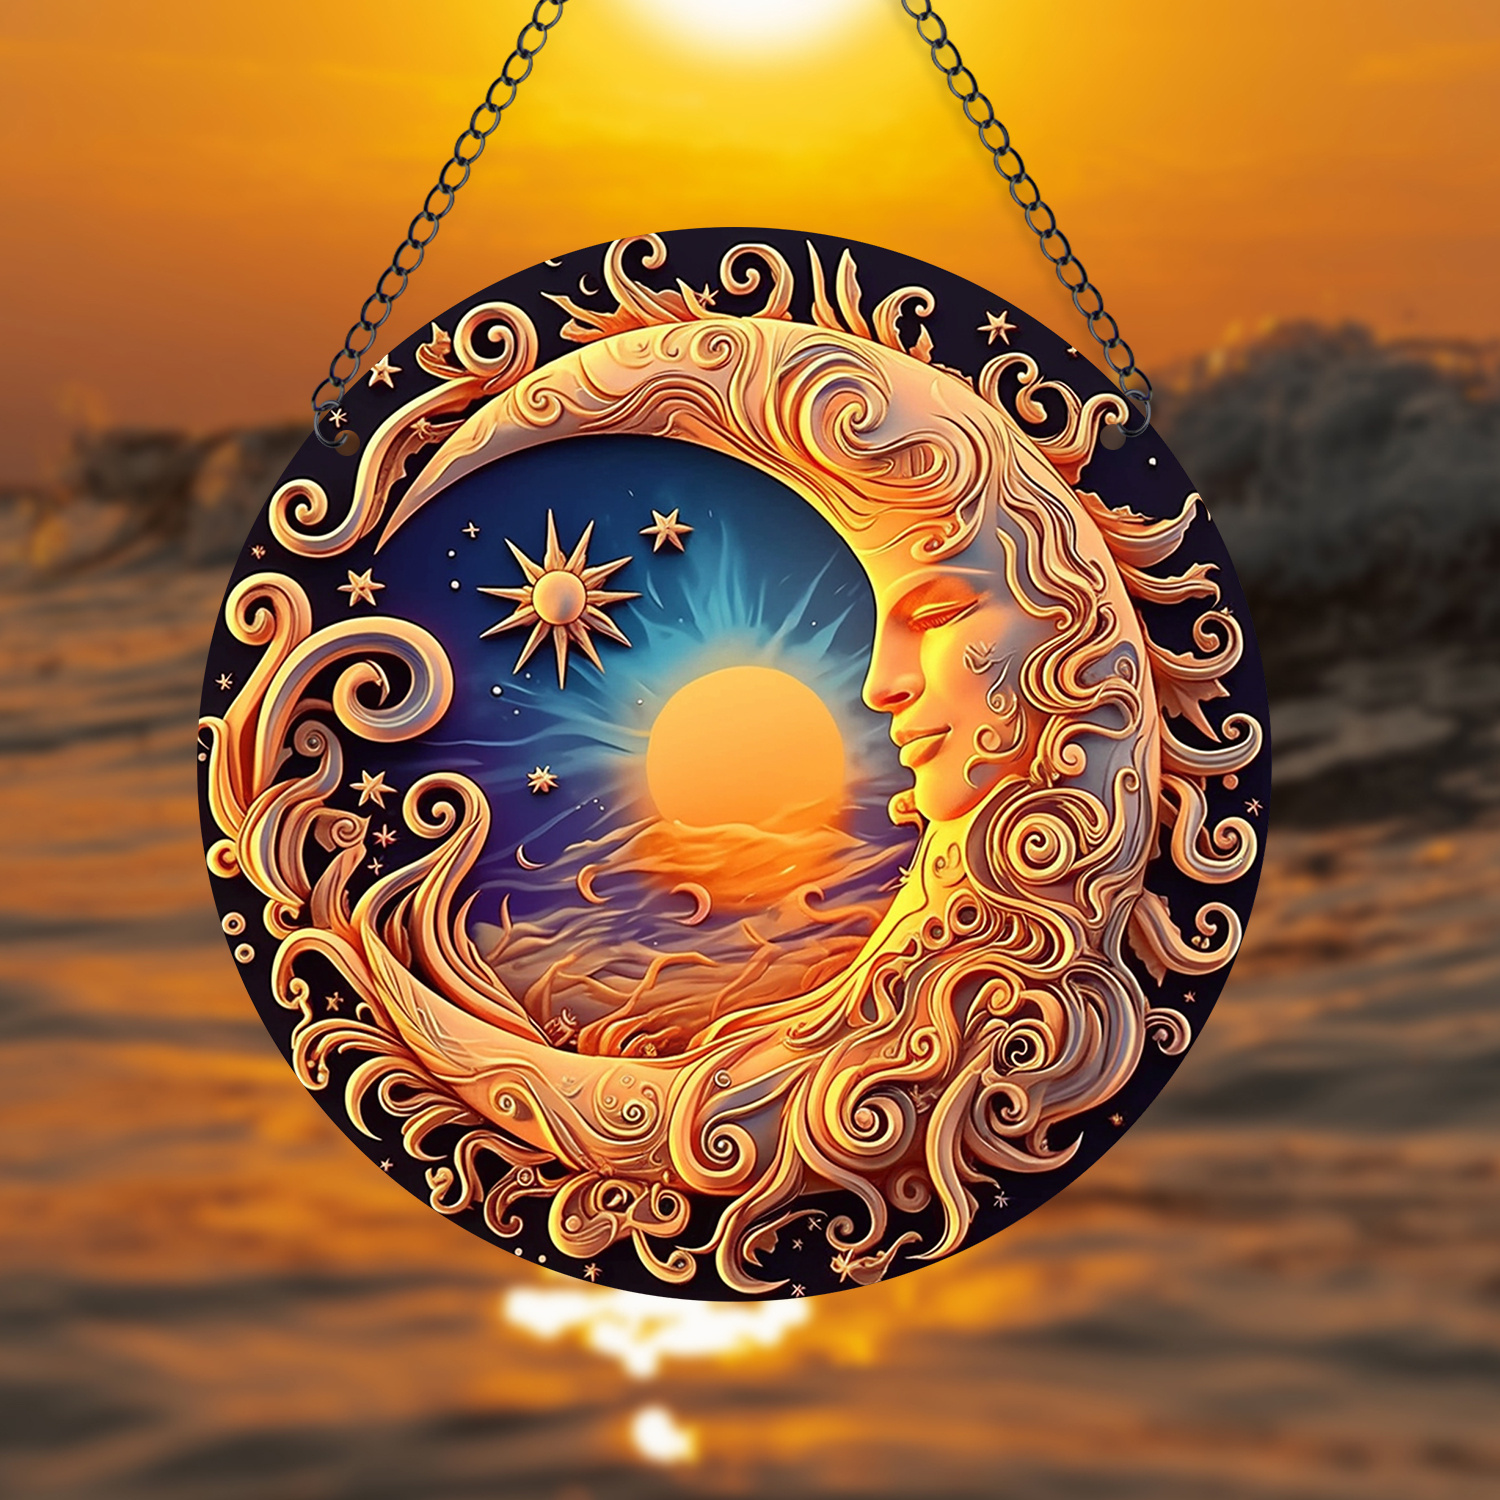 

Sun & Moon Acrylic Suncatcher - 6"x6" Stained Glass-style Window Hanging, Versatile Home & Garden Decor, Perfect For Bedroom & Holiday Gifts